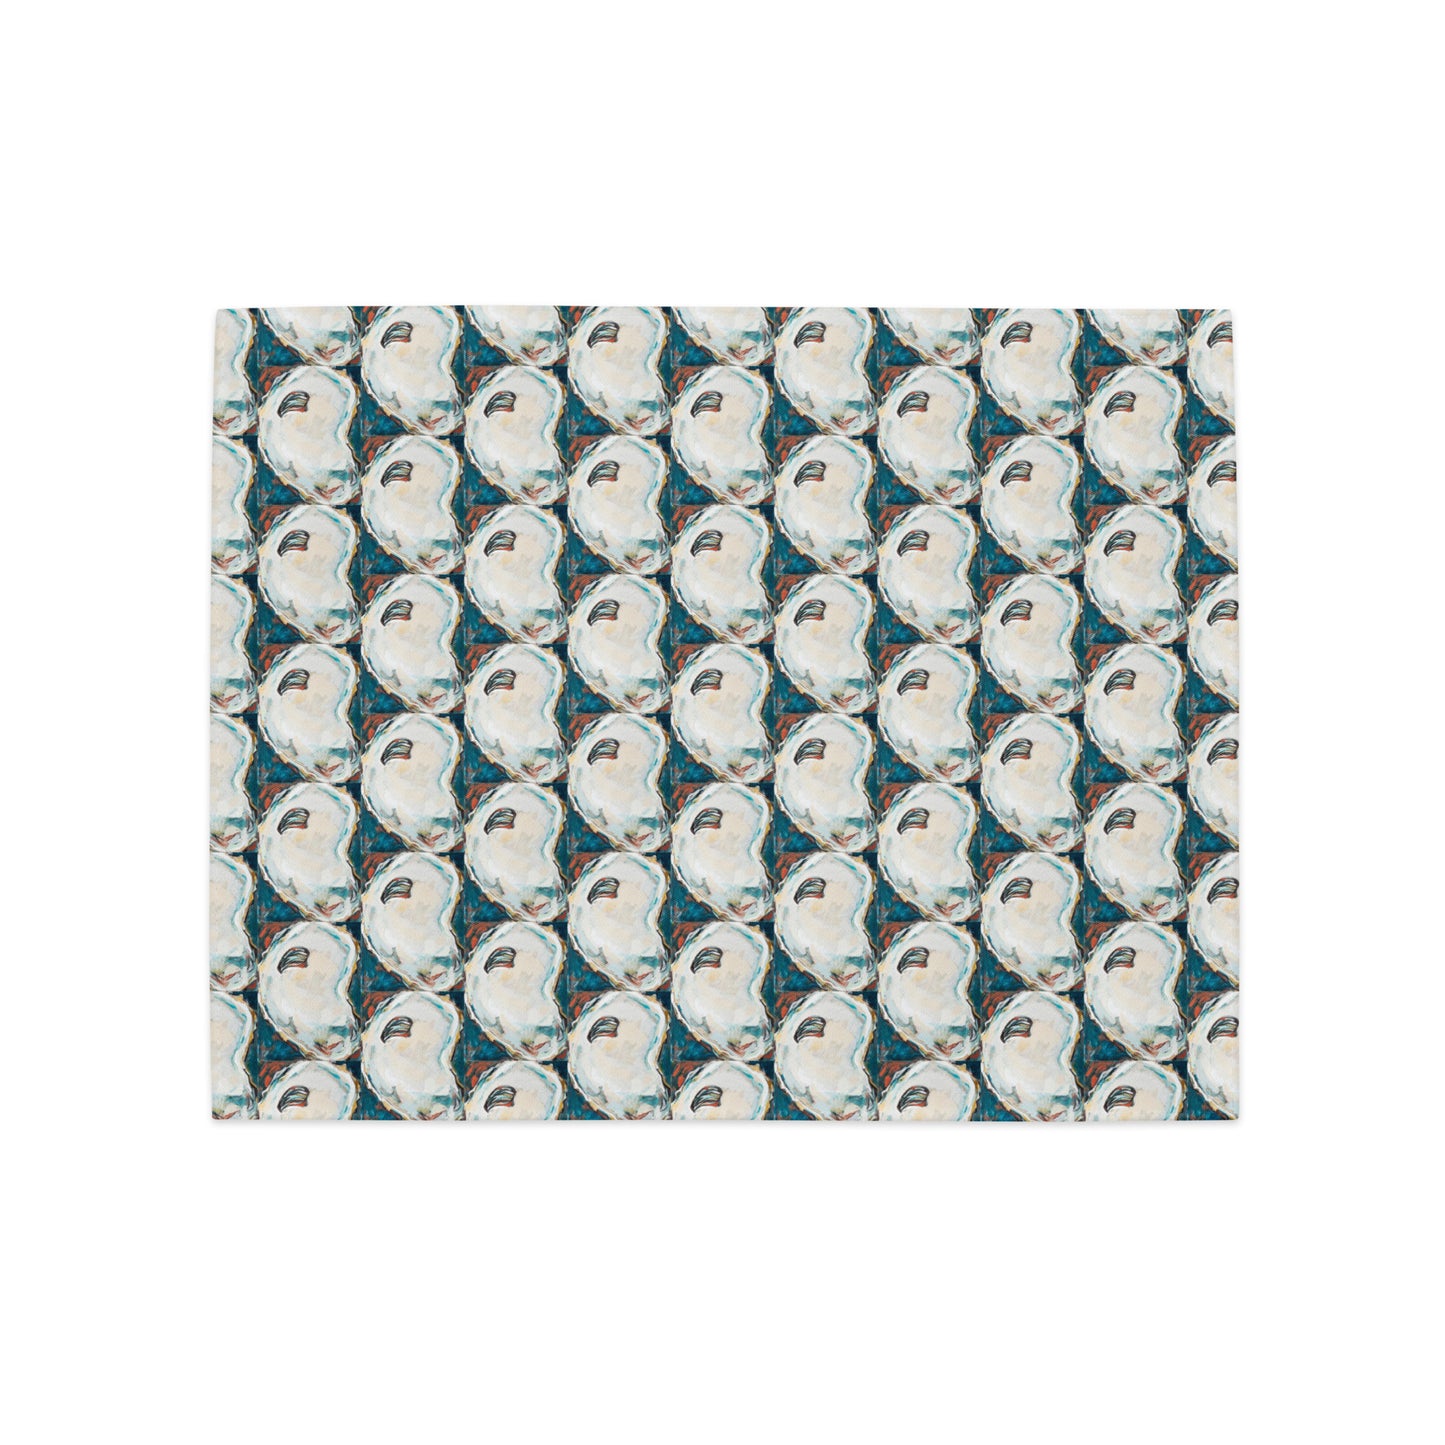 Chill Oyster Shells Placemat Set